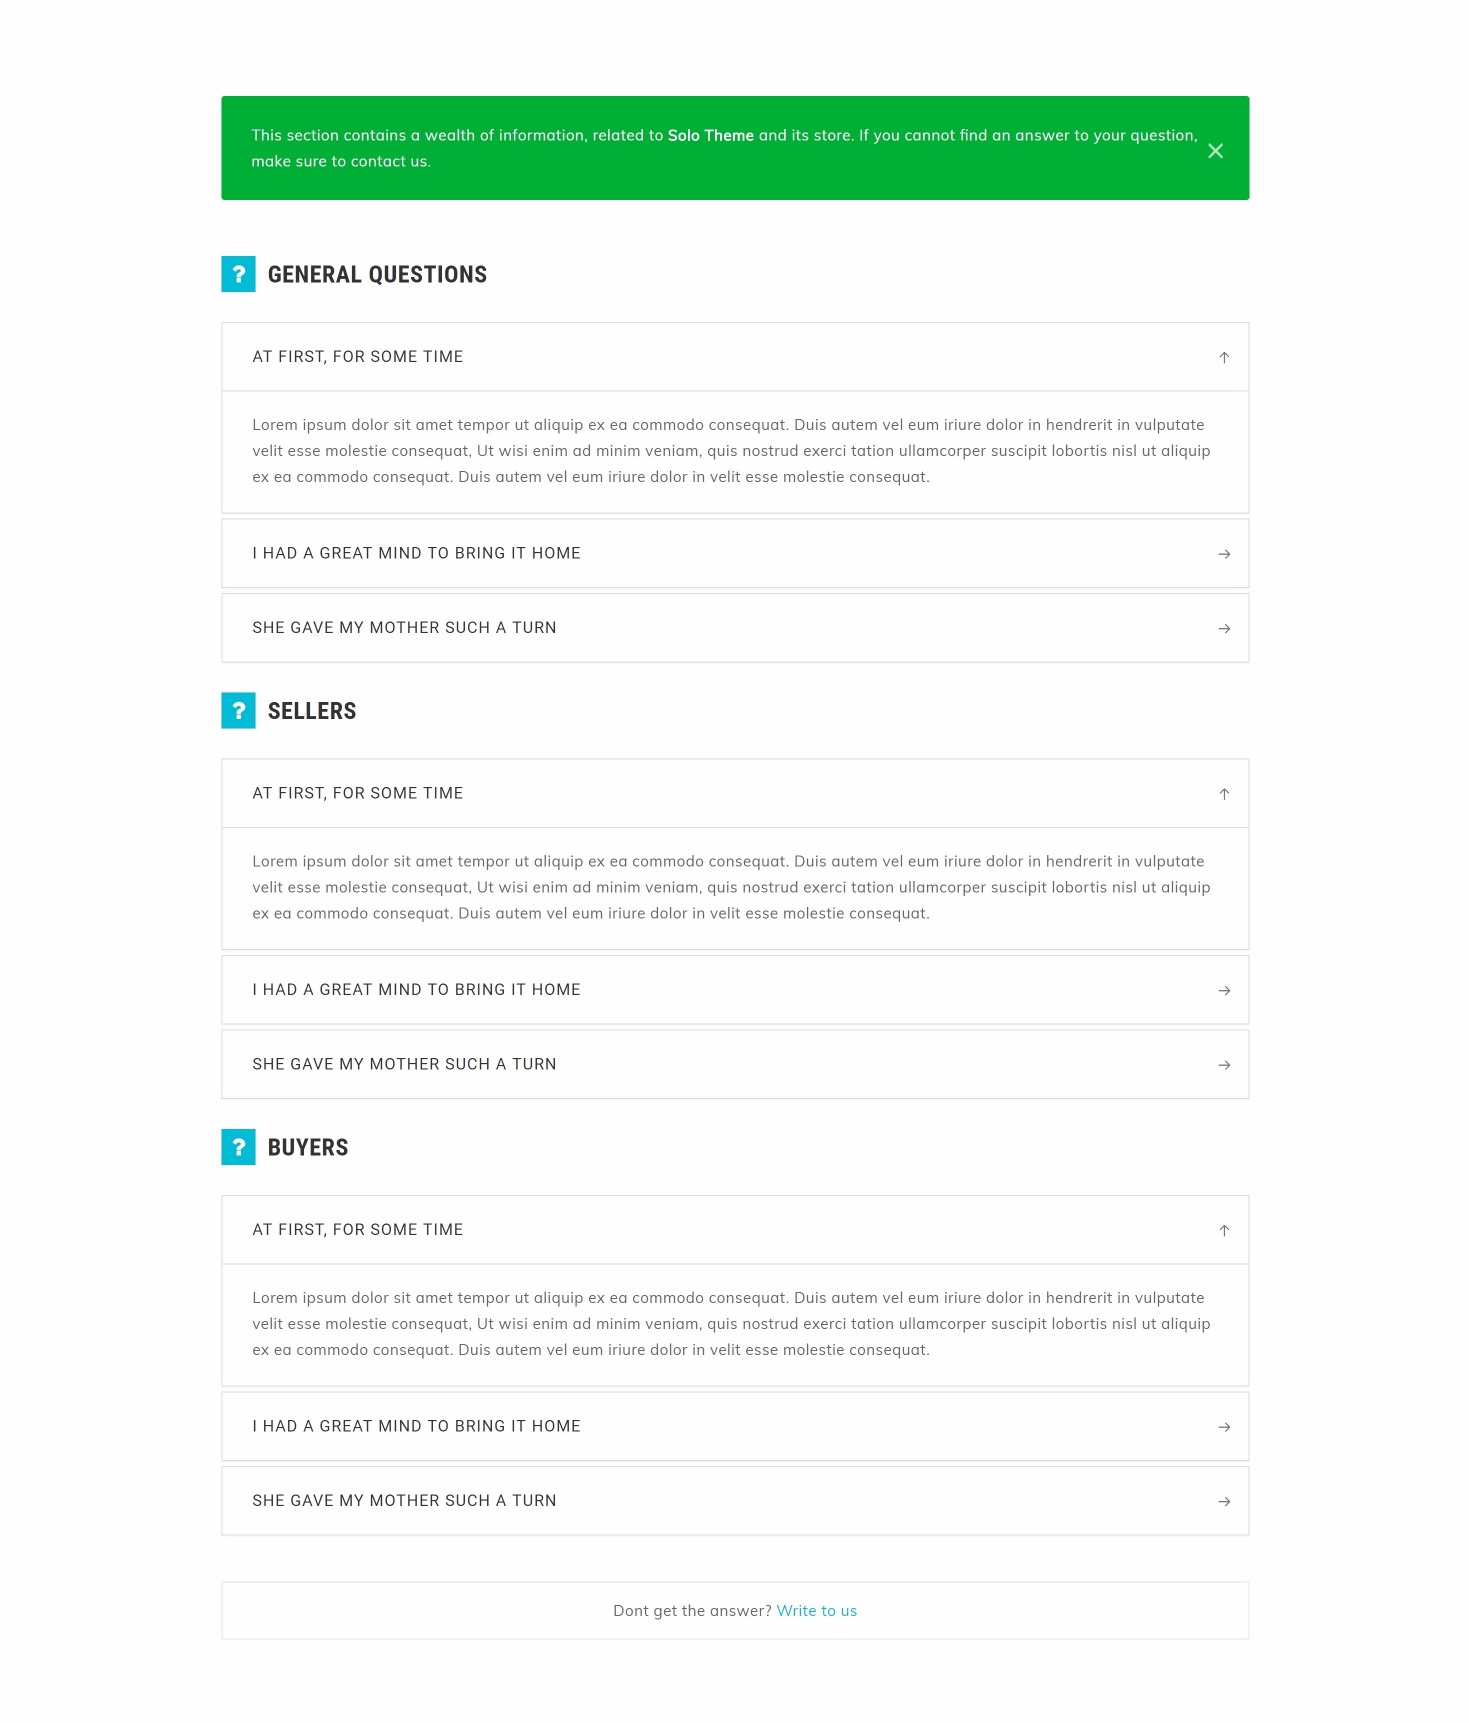 Solo - 103+ Pages HTML Bootstrap Template - 12